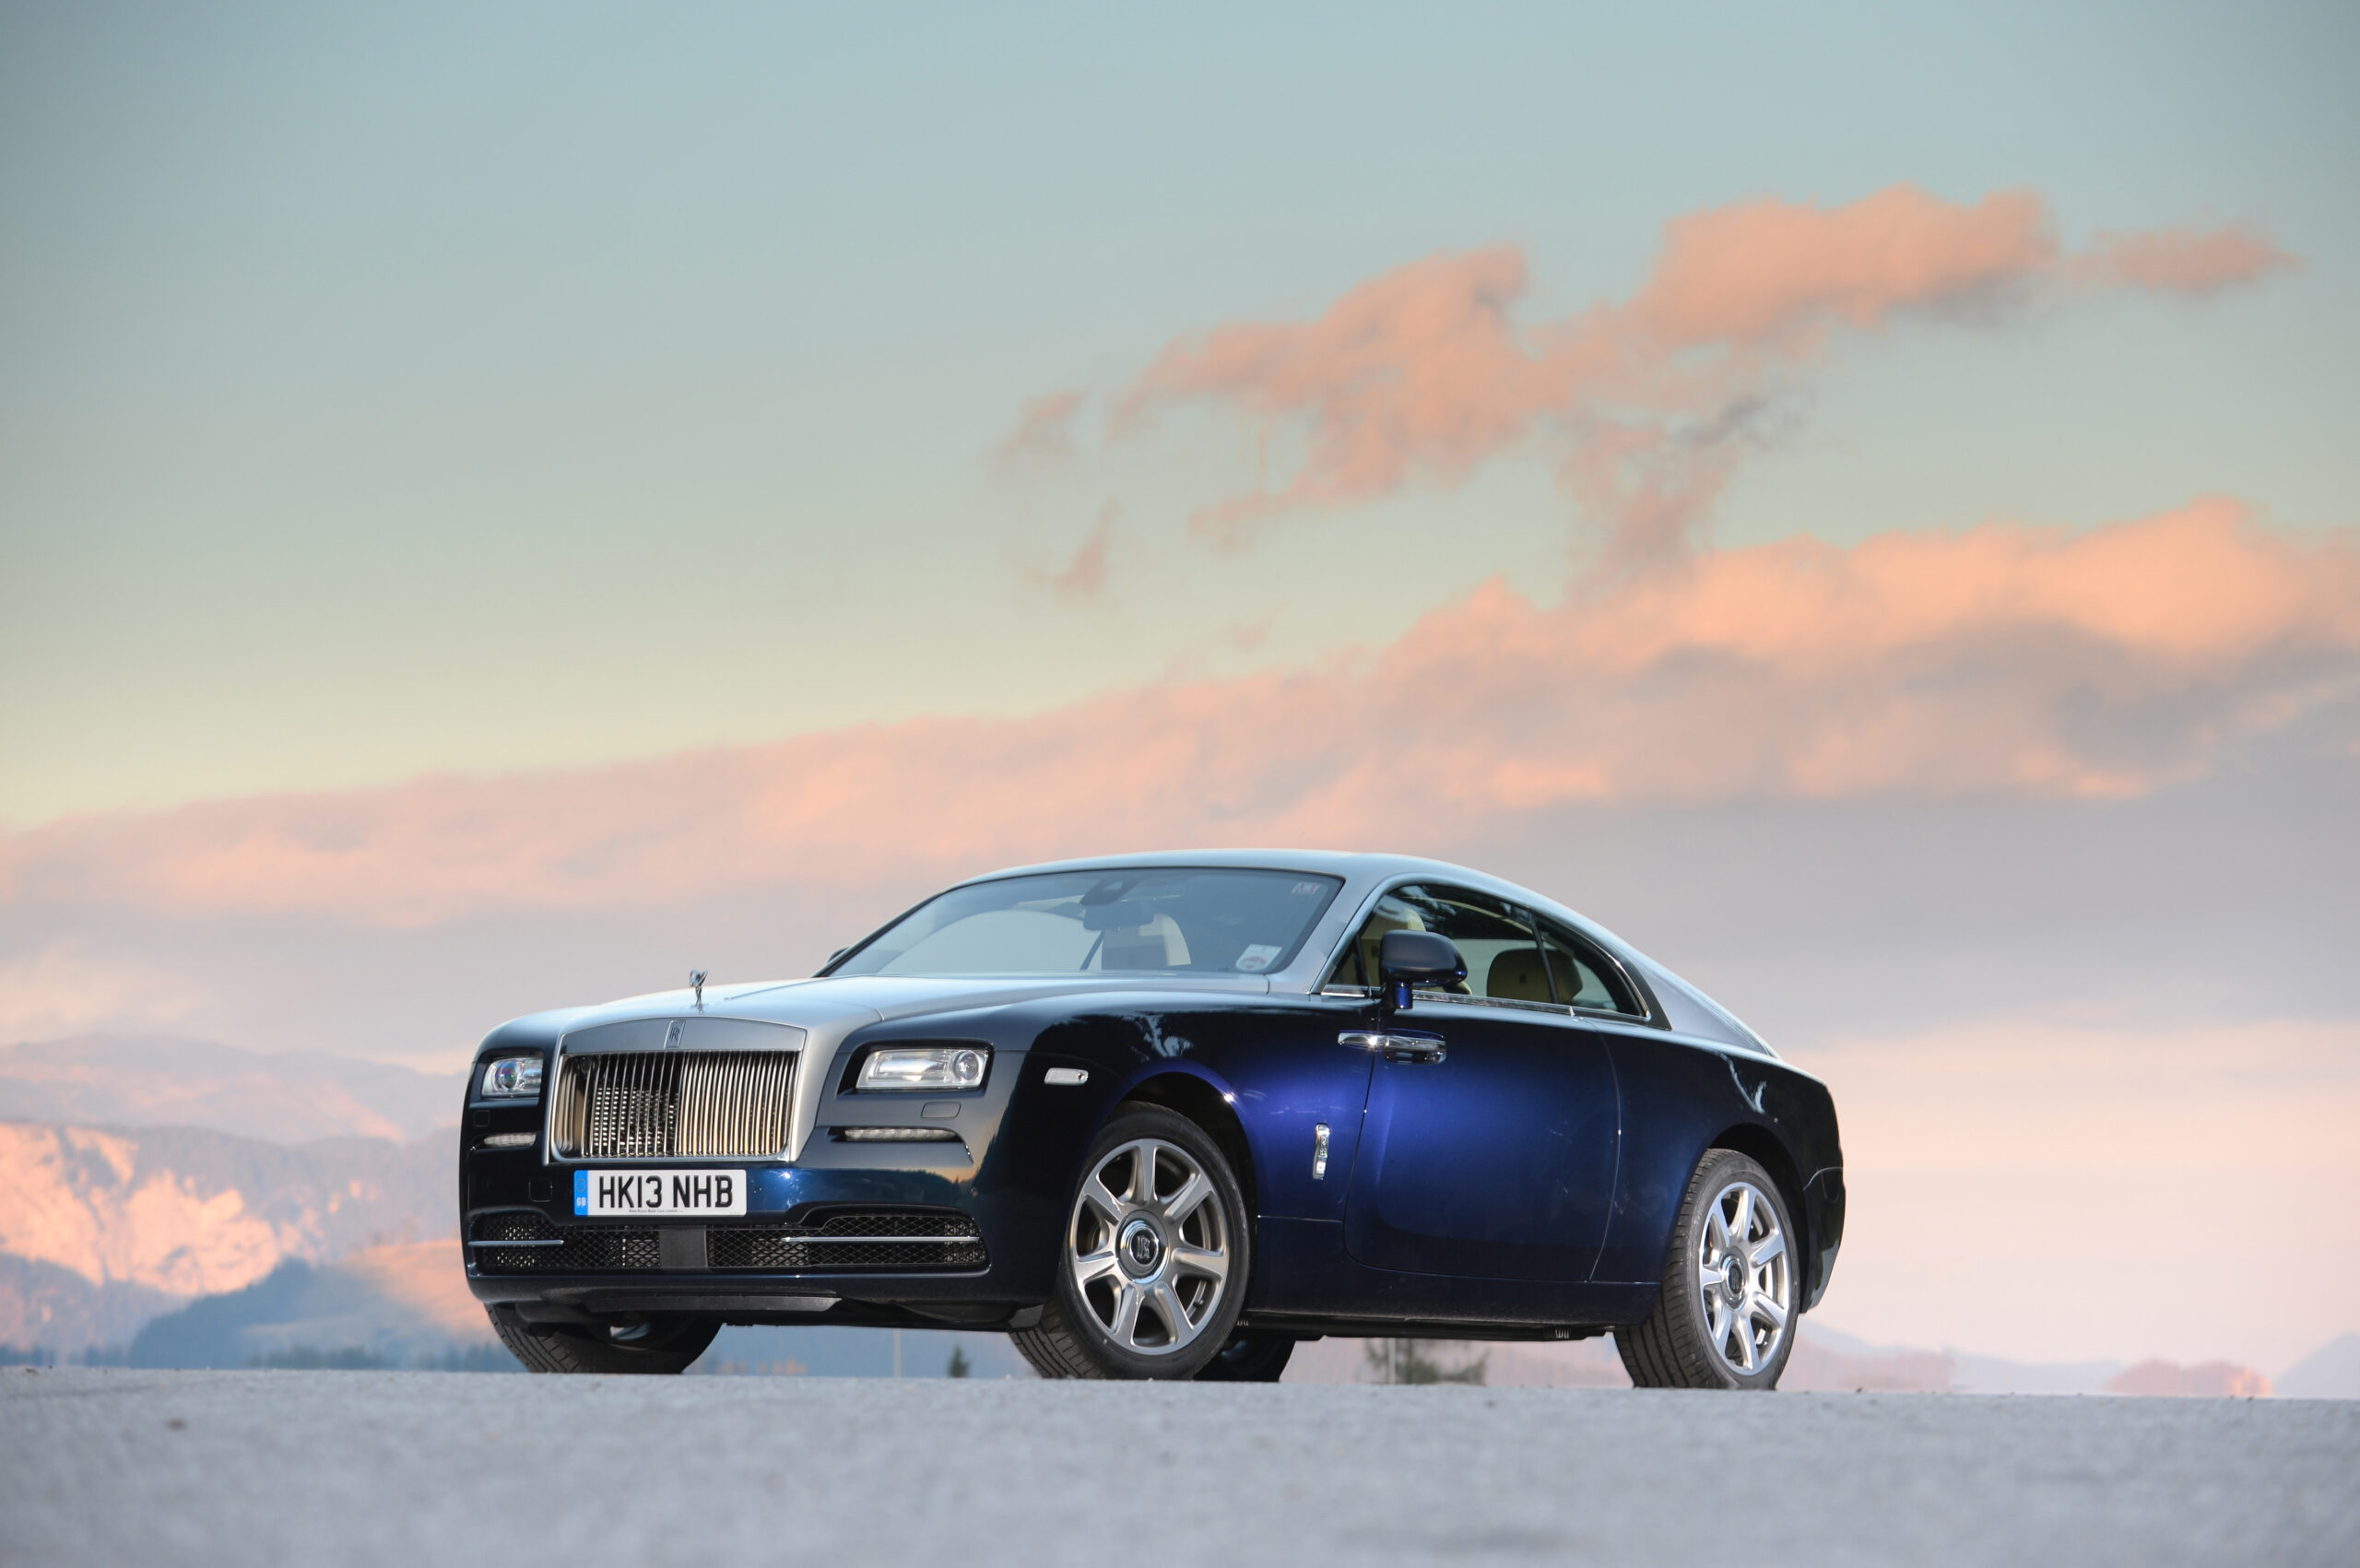 Driven: 2014 Rolls-Royce Wraith. The Ultimate Grand Tourer.